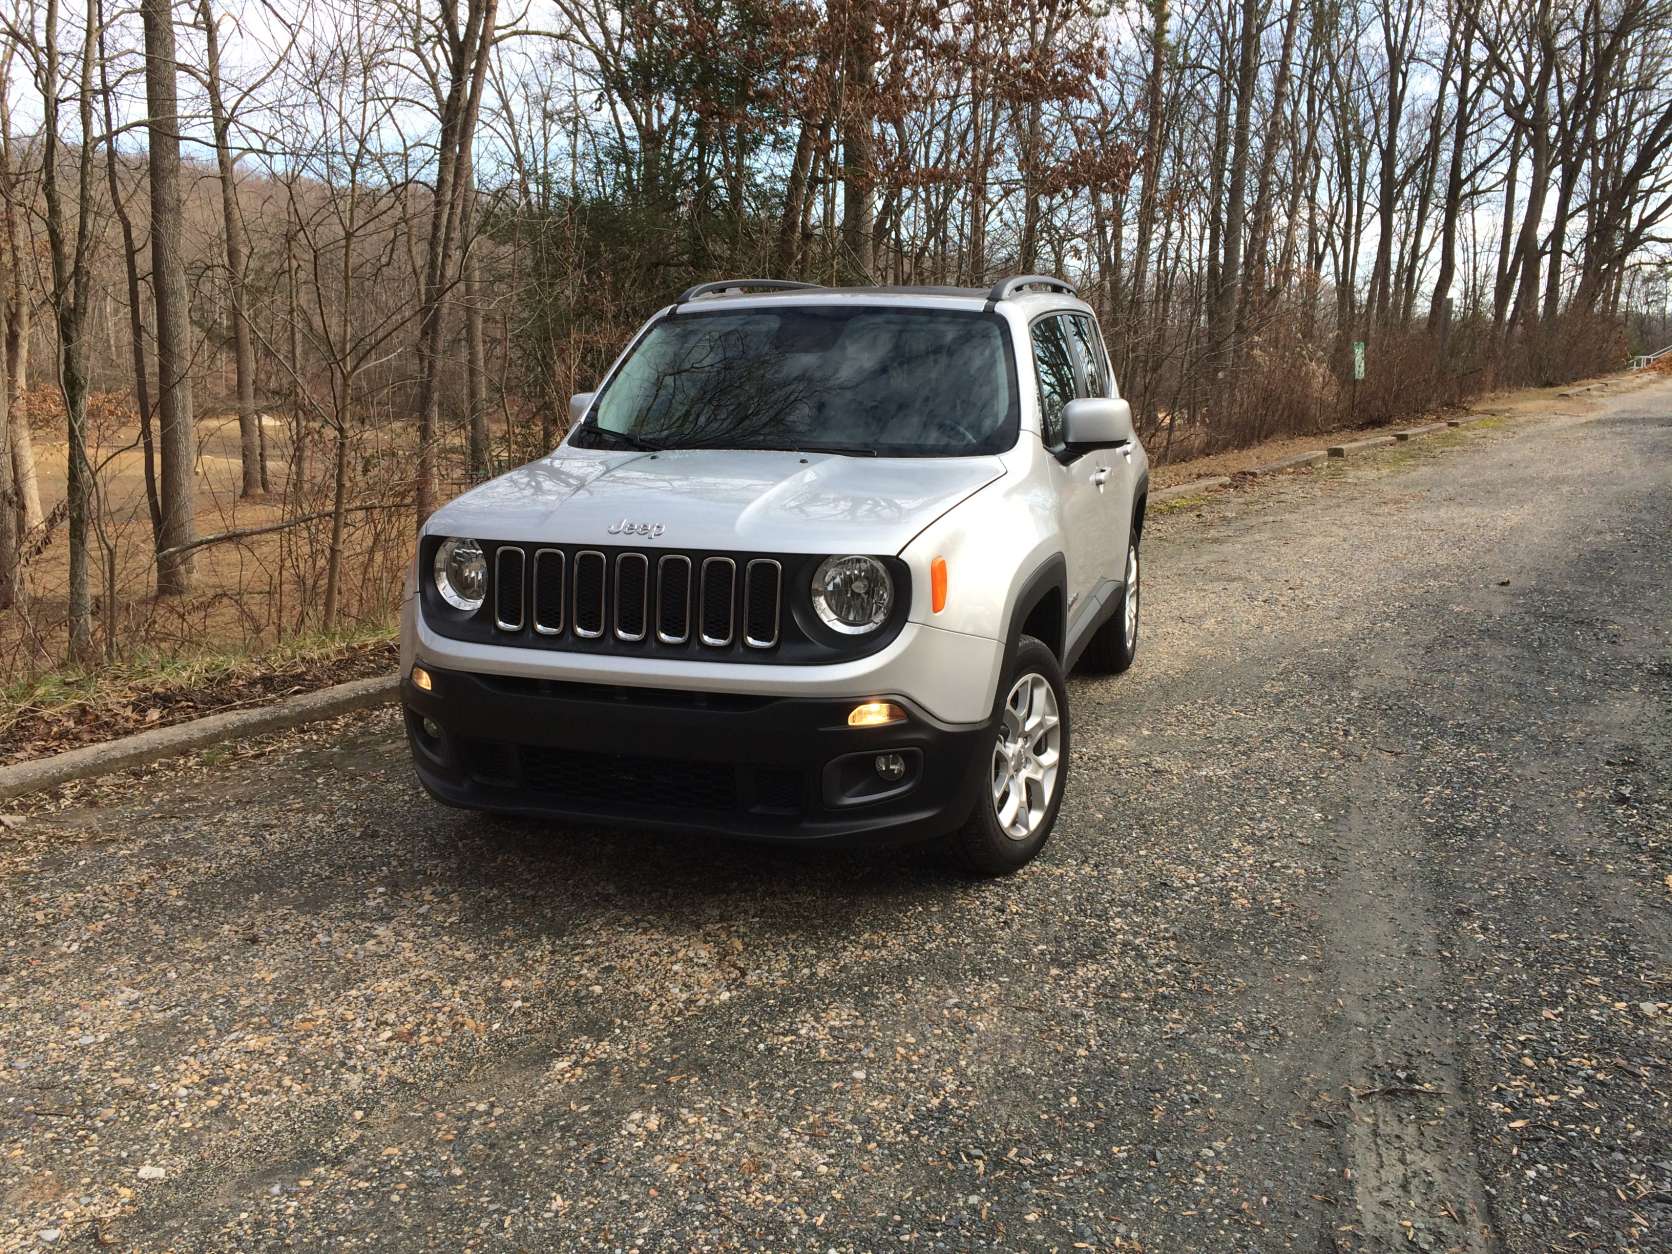 Smaller Jeeps just don’t quite seem to have that complete look that screams Jeep. But the Renegade finally hits the mark with that all-important look without giving up something in the name of cost cutting. (WTOP/Mike Parris)